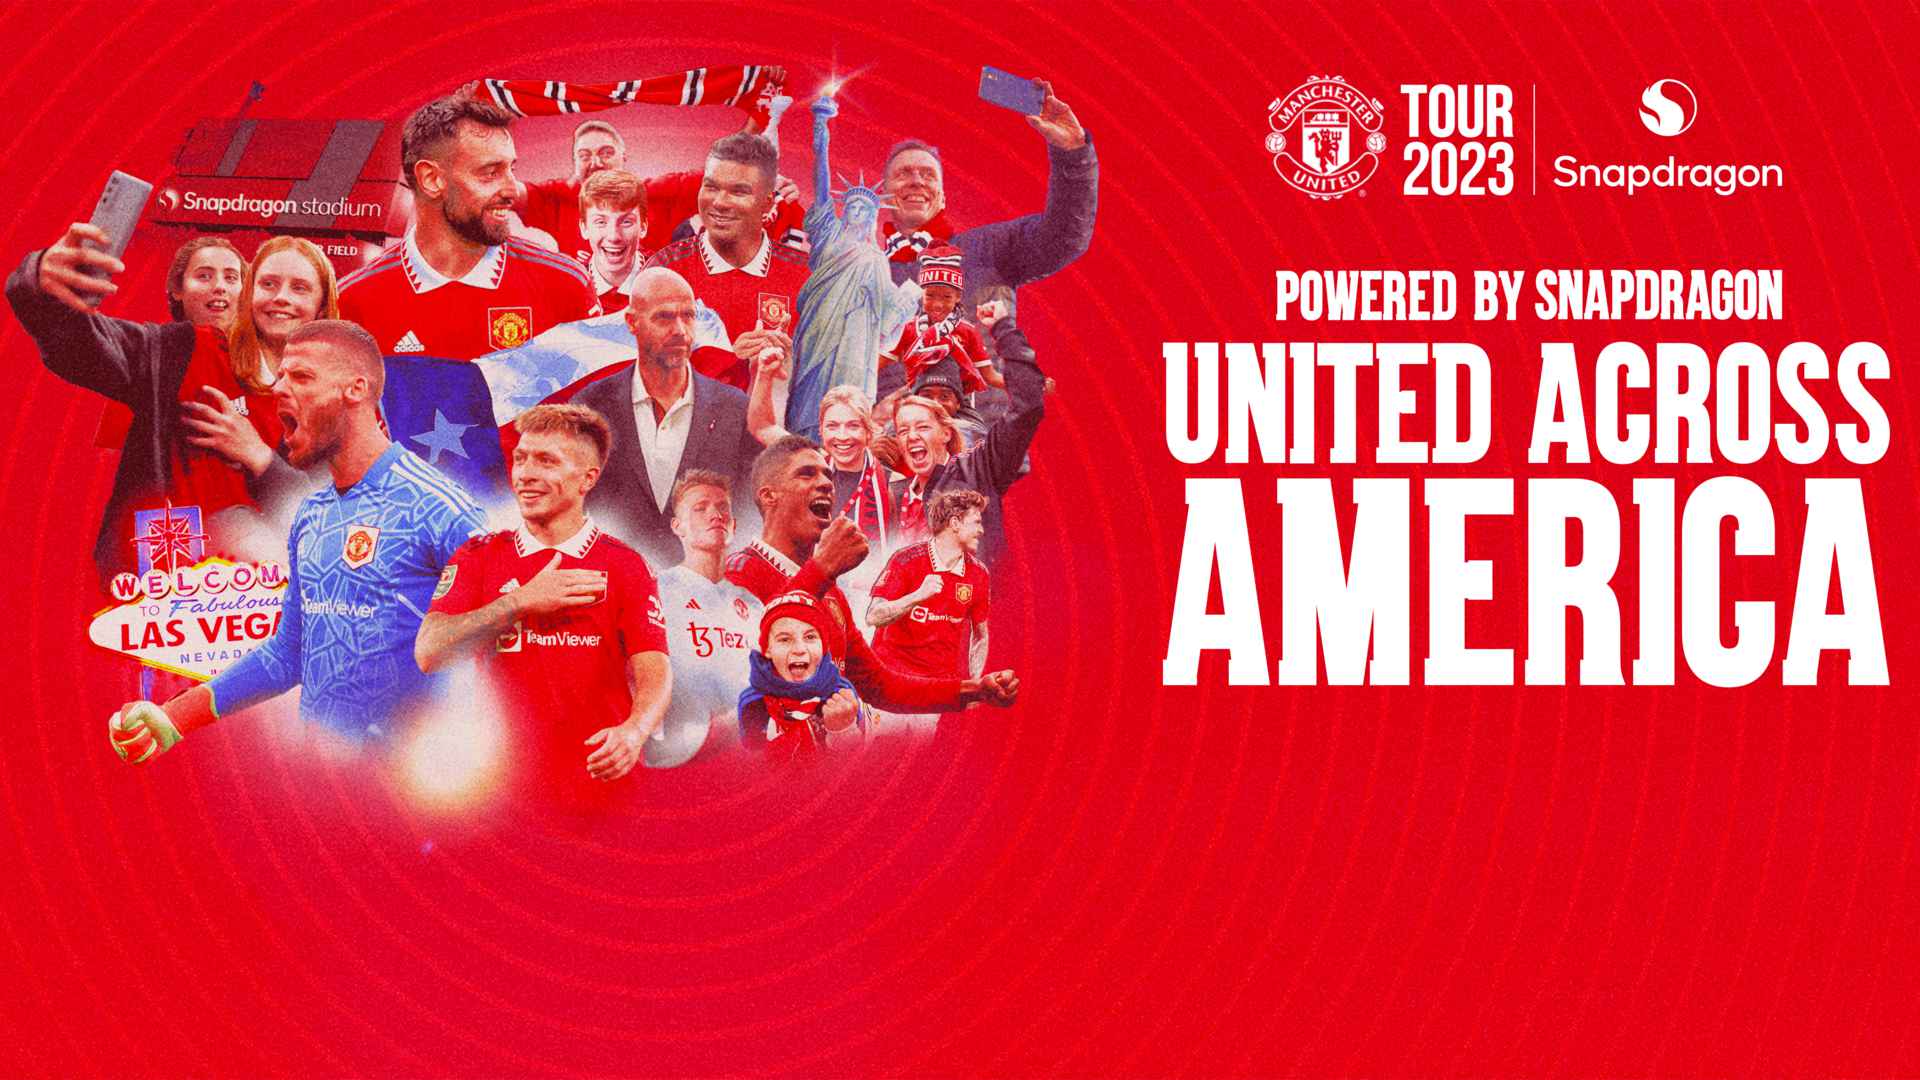 Snapdragon announced as presenting partner of Man Utd's USA Tour 2023